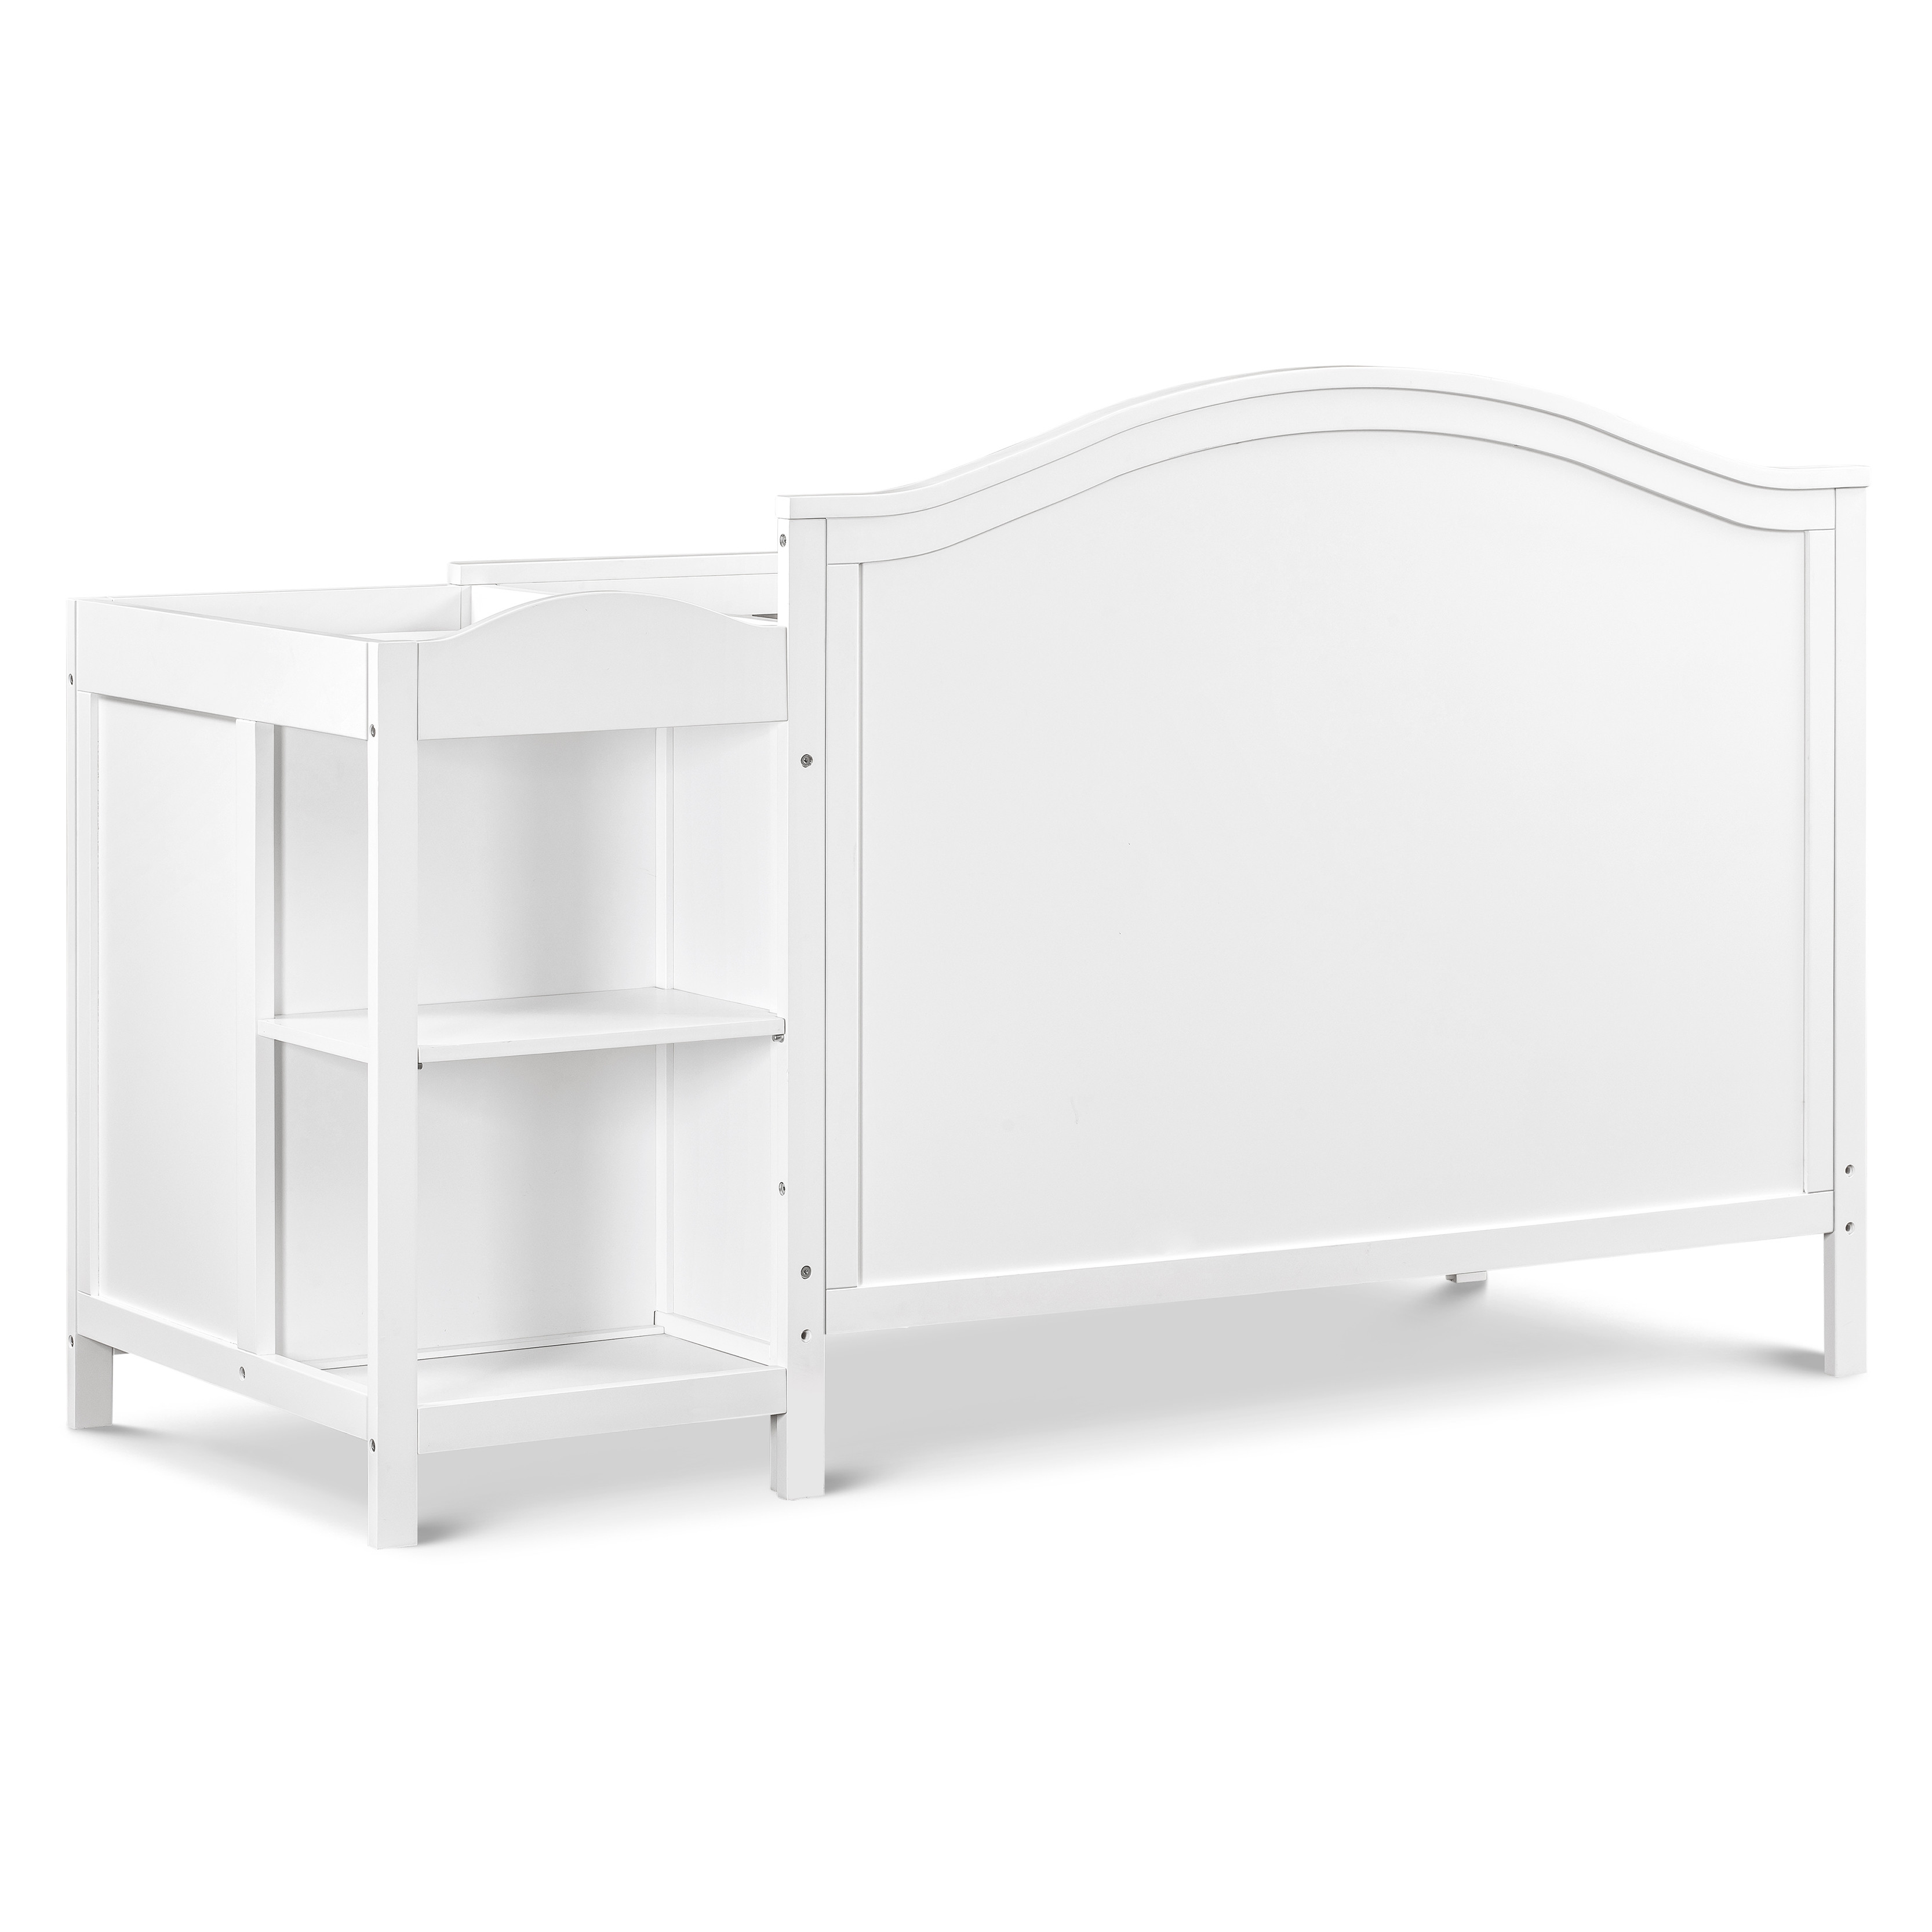 DaVinci Charlie 4-in-1 Convertible Crib and Changer Combo in White - image 5 of 11